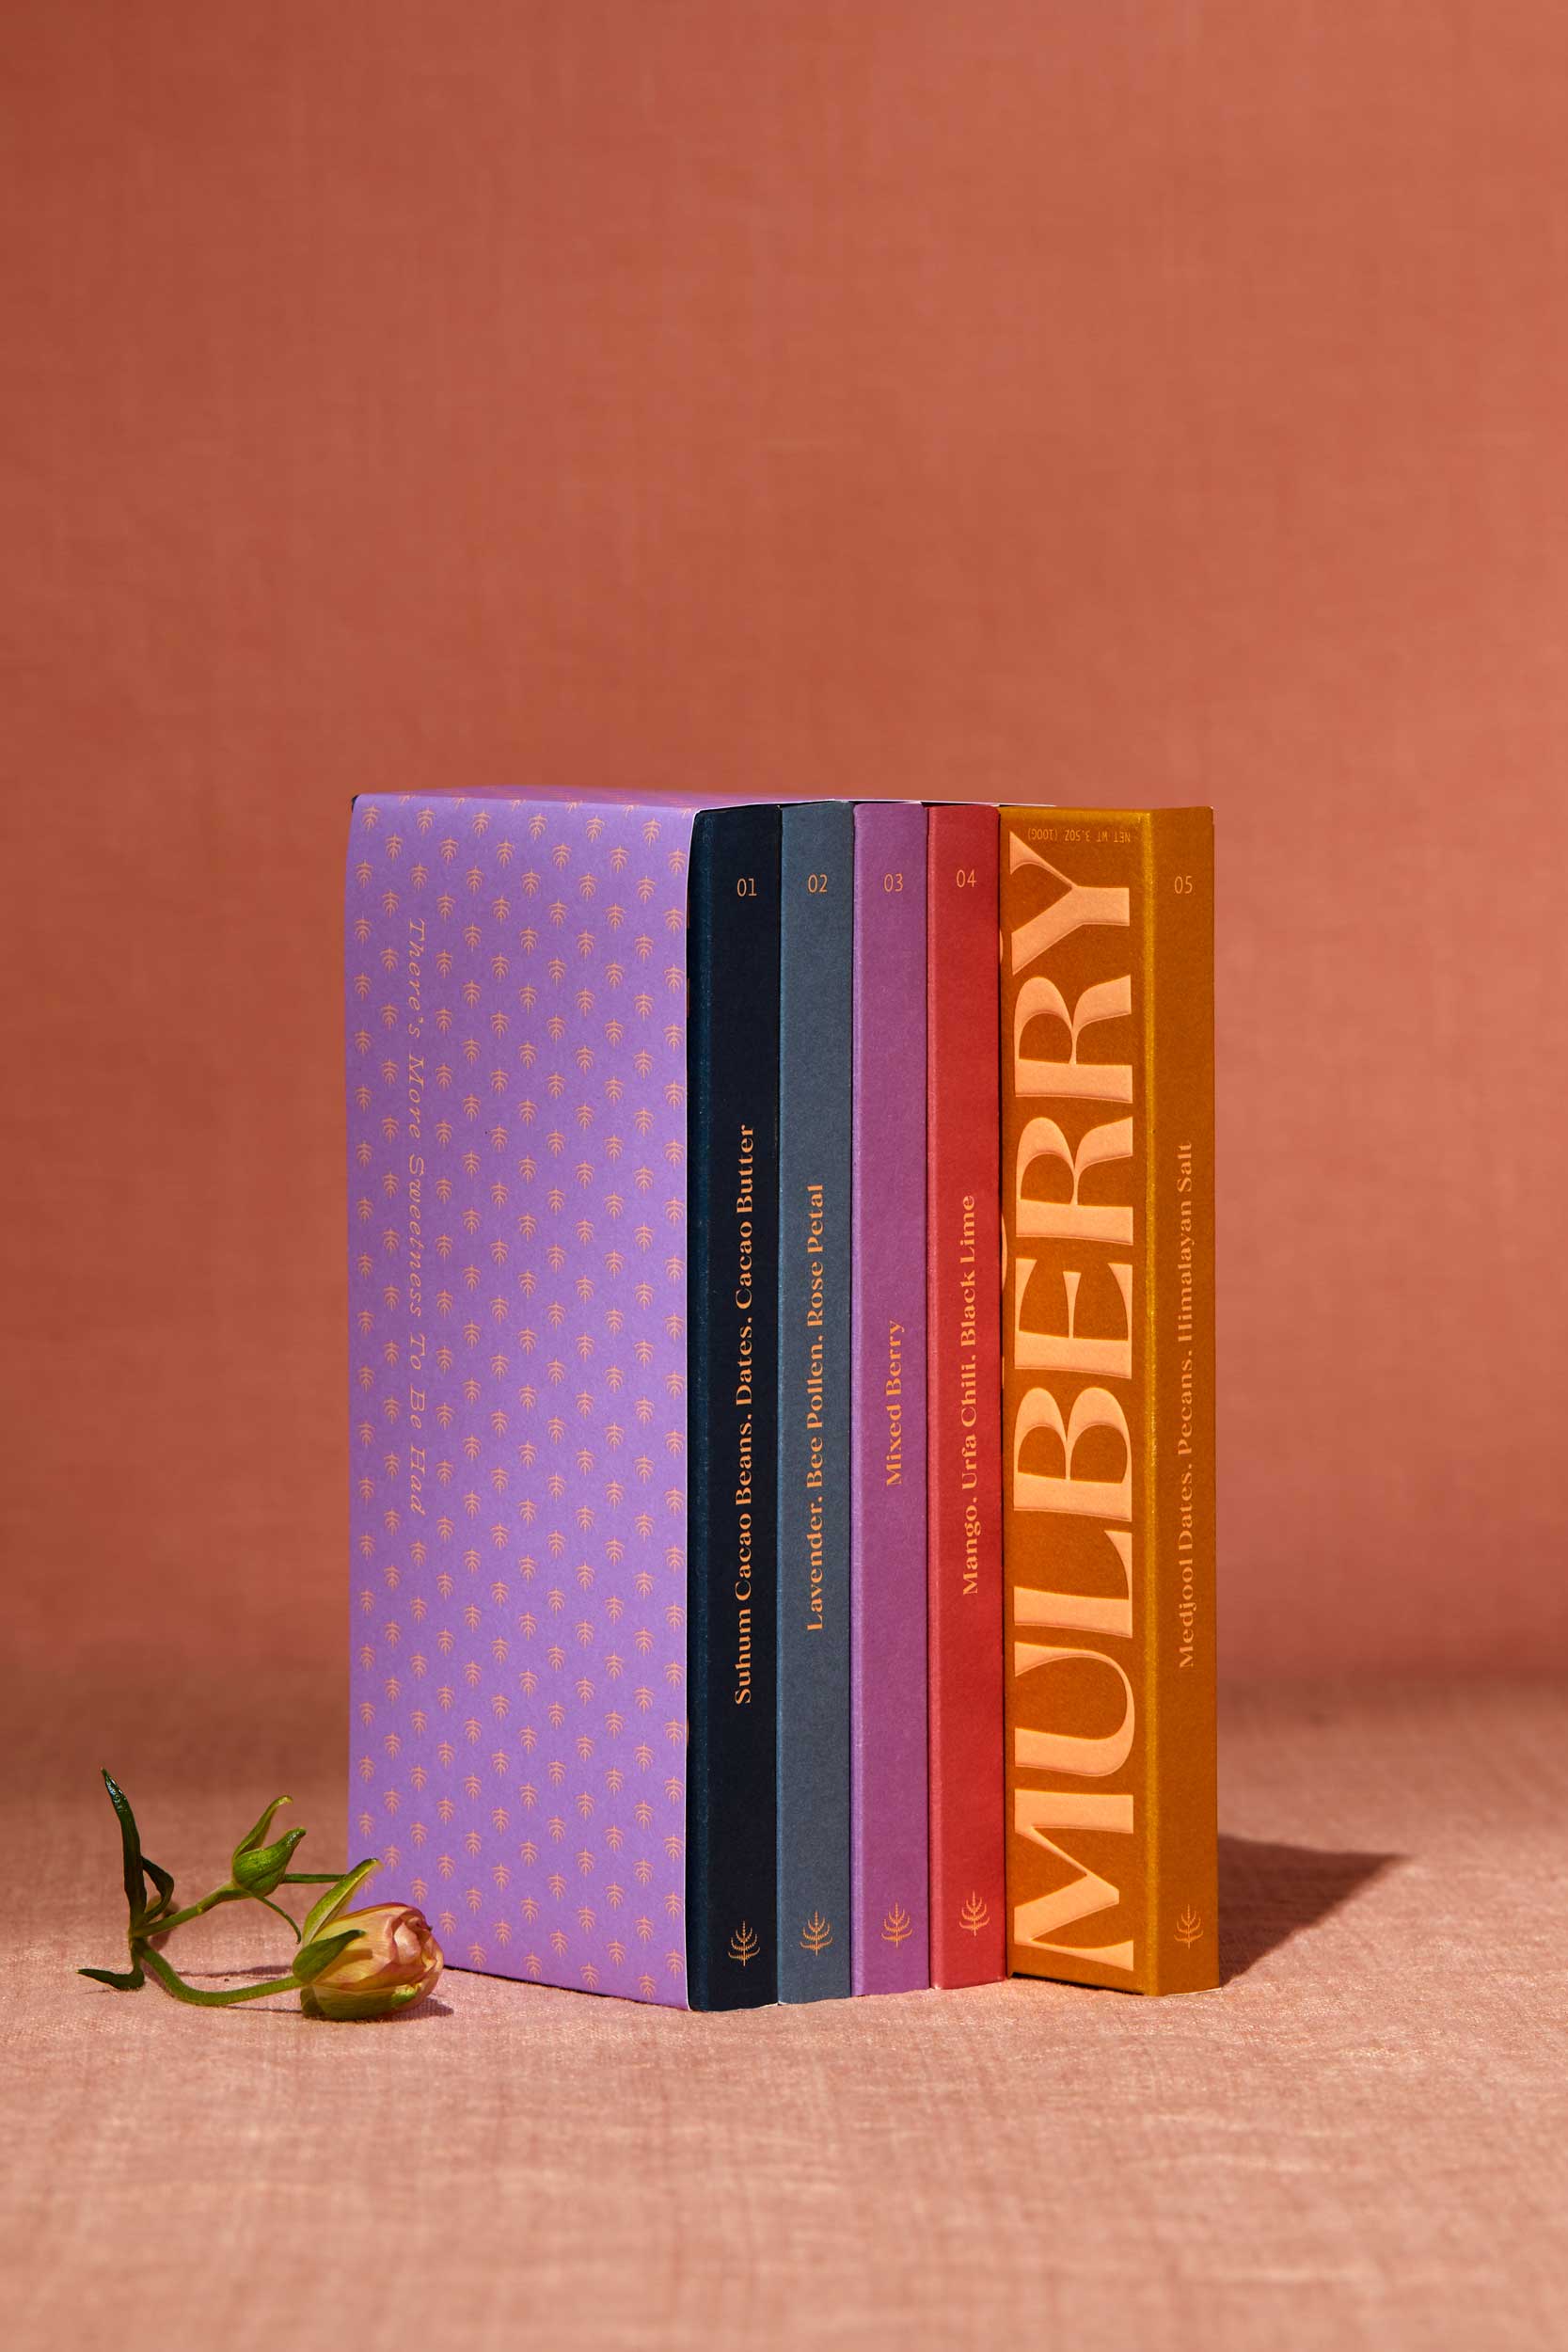 A gift set of 5 date sweetened chocolate bars with no added sugar stands on a peach linen backdrop. To the left of the gift set is a delicate flower. The gift set resembles a library set of books and is wrapped in purple paper adorned with a mulberry motif. The 5 chocolate boxes include: Pure Dark in a navy box; Lavender, Bee Pollen, Rose Petal in a sky blue box; Mixed Berry in a purple box; Mango, Urfa Chili, Black Lime in a rose box; and, Medjool Date, Pecan, Himalayan Salt in a mustard box.